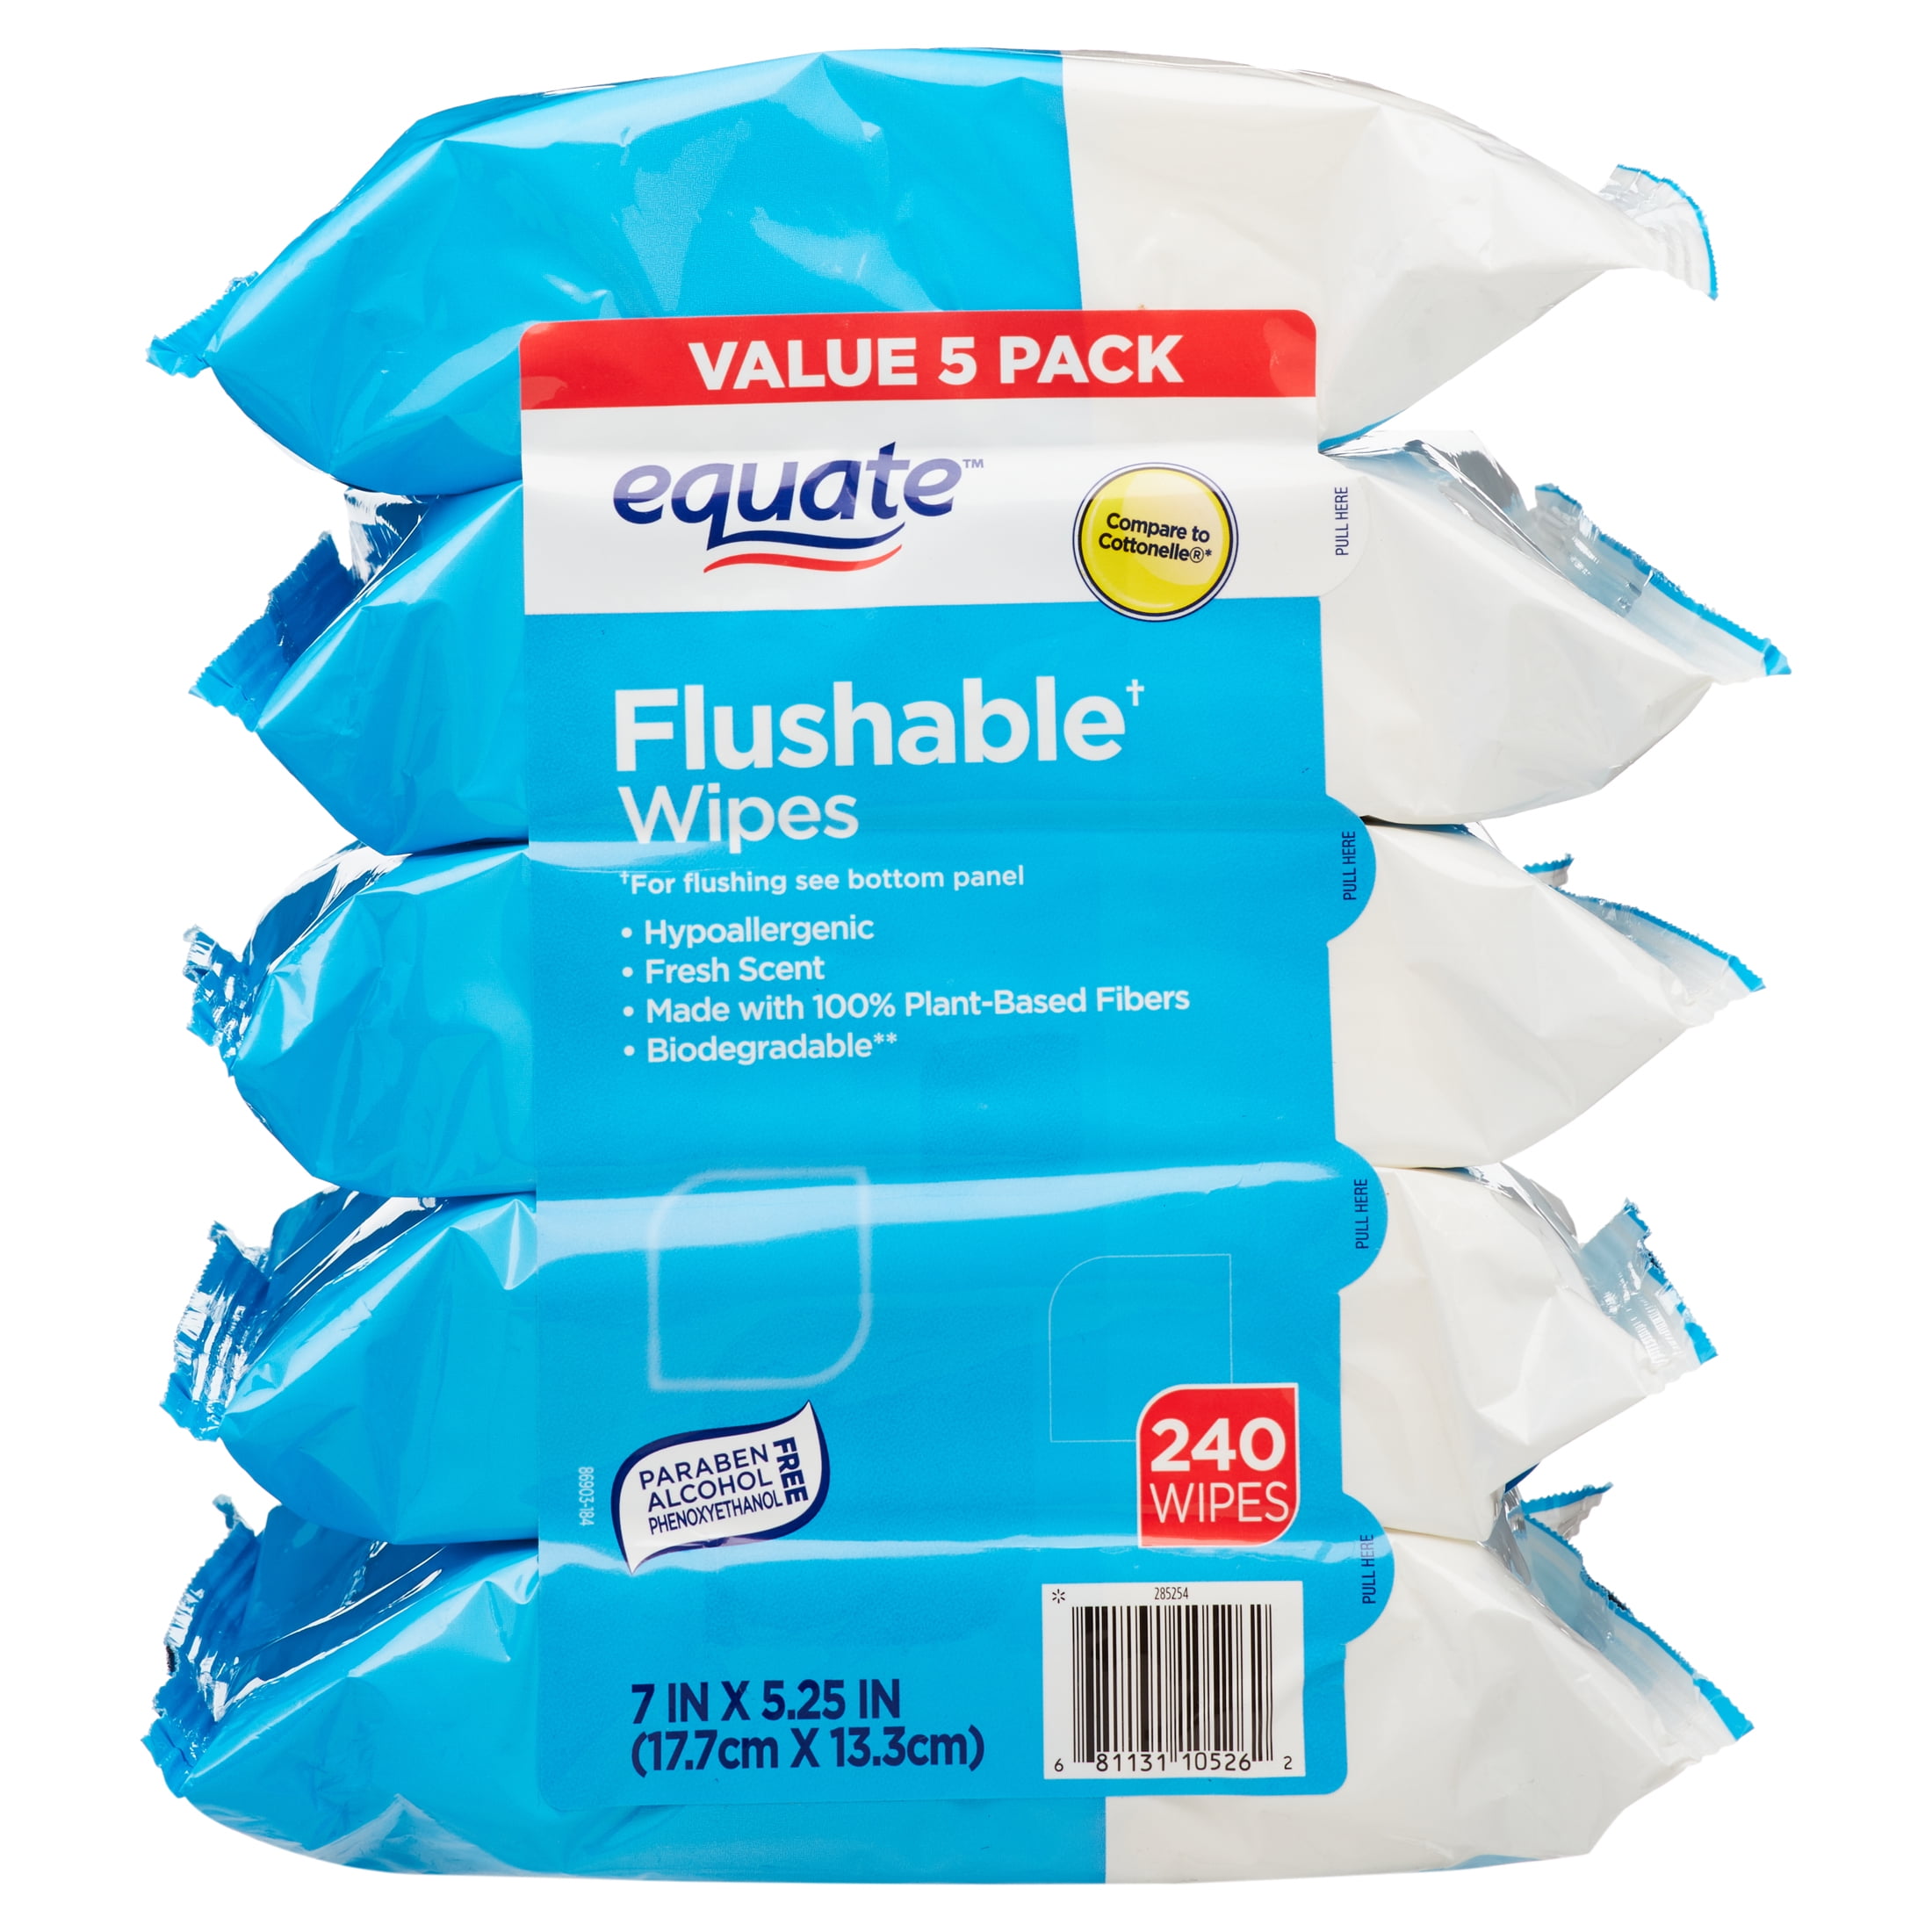 Equate Flushable Wipes 240 wipes total Fresh Scent 5 packs of 48 wipes 